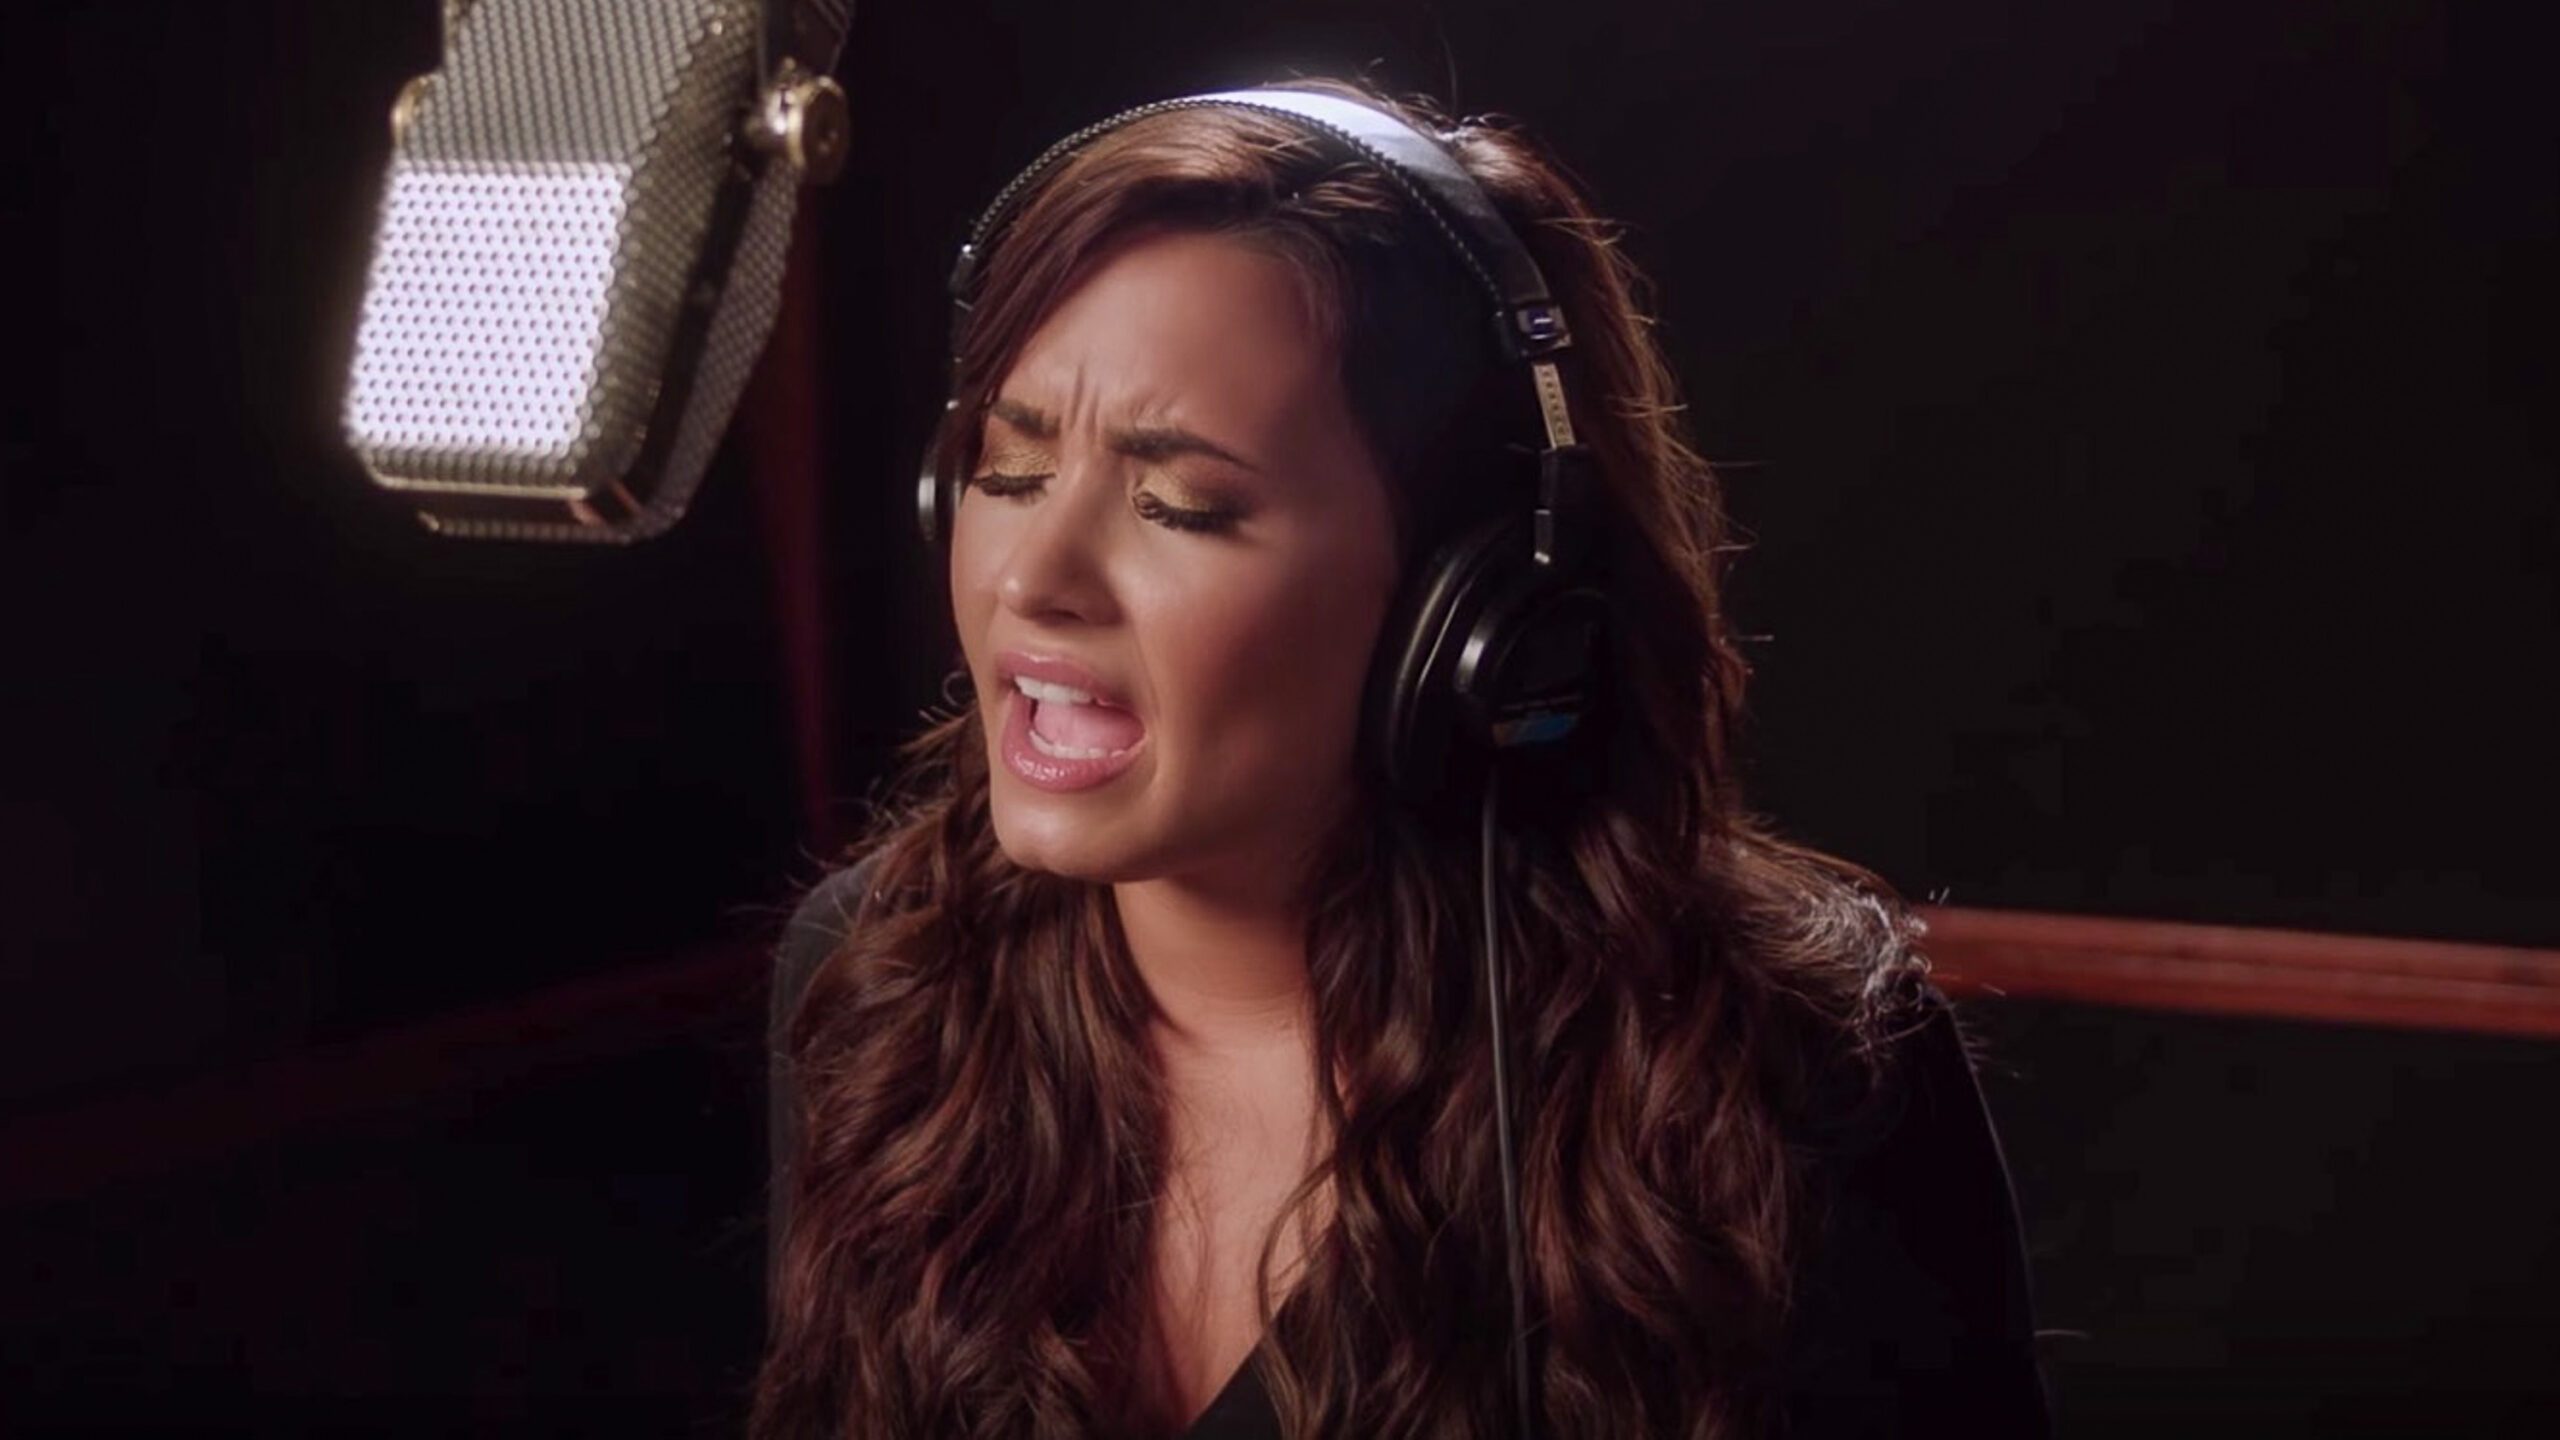 WATCH: Demi Lovato belts out powerful rendition of ‘Silent Night’